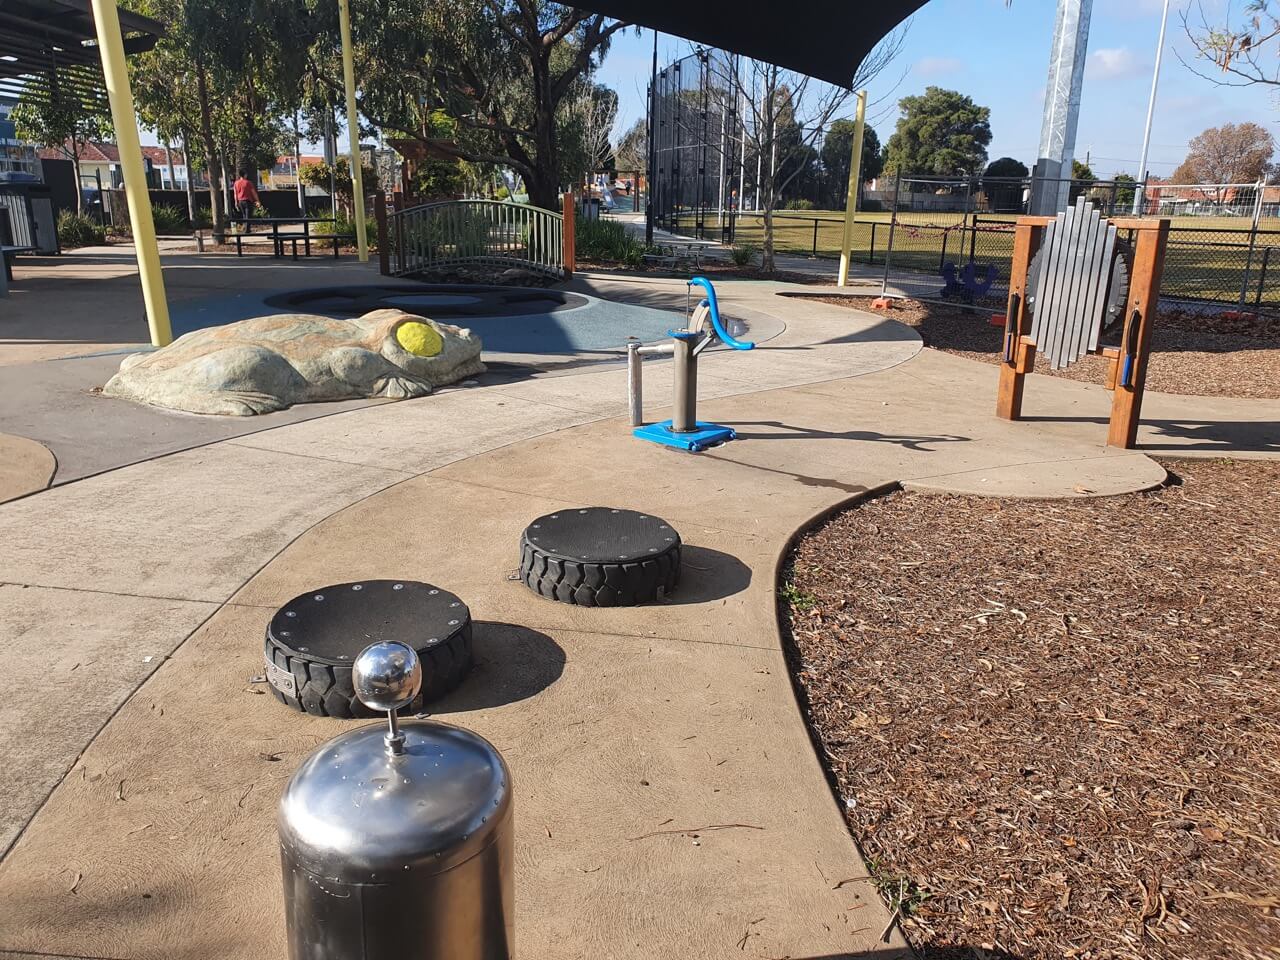 Accessible Playground at Errington Reserve in St Albans. Photo by Chel D.